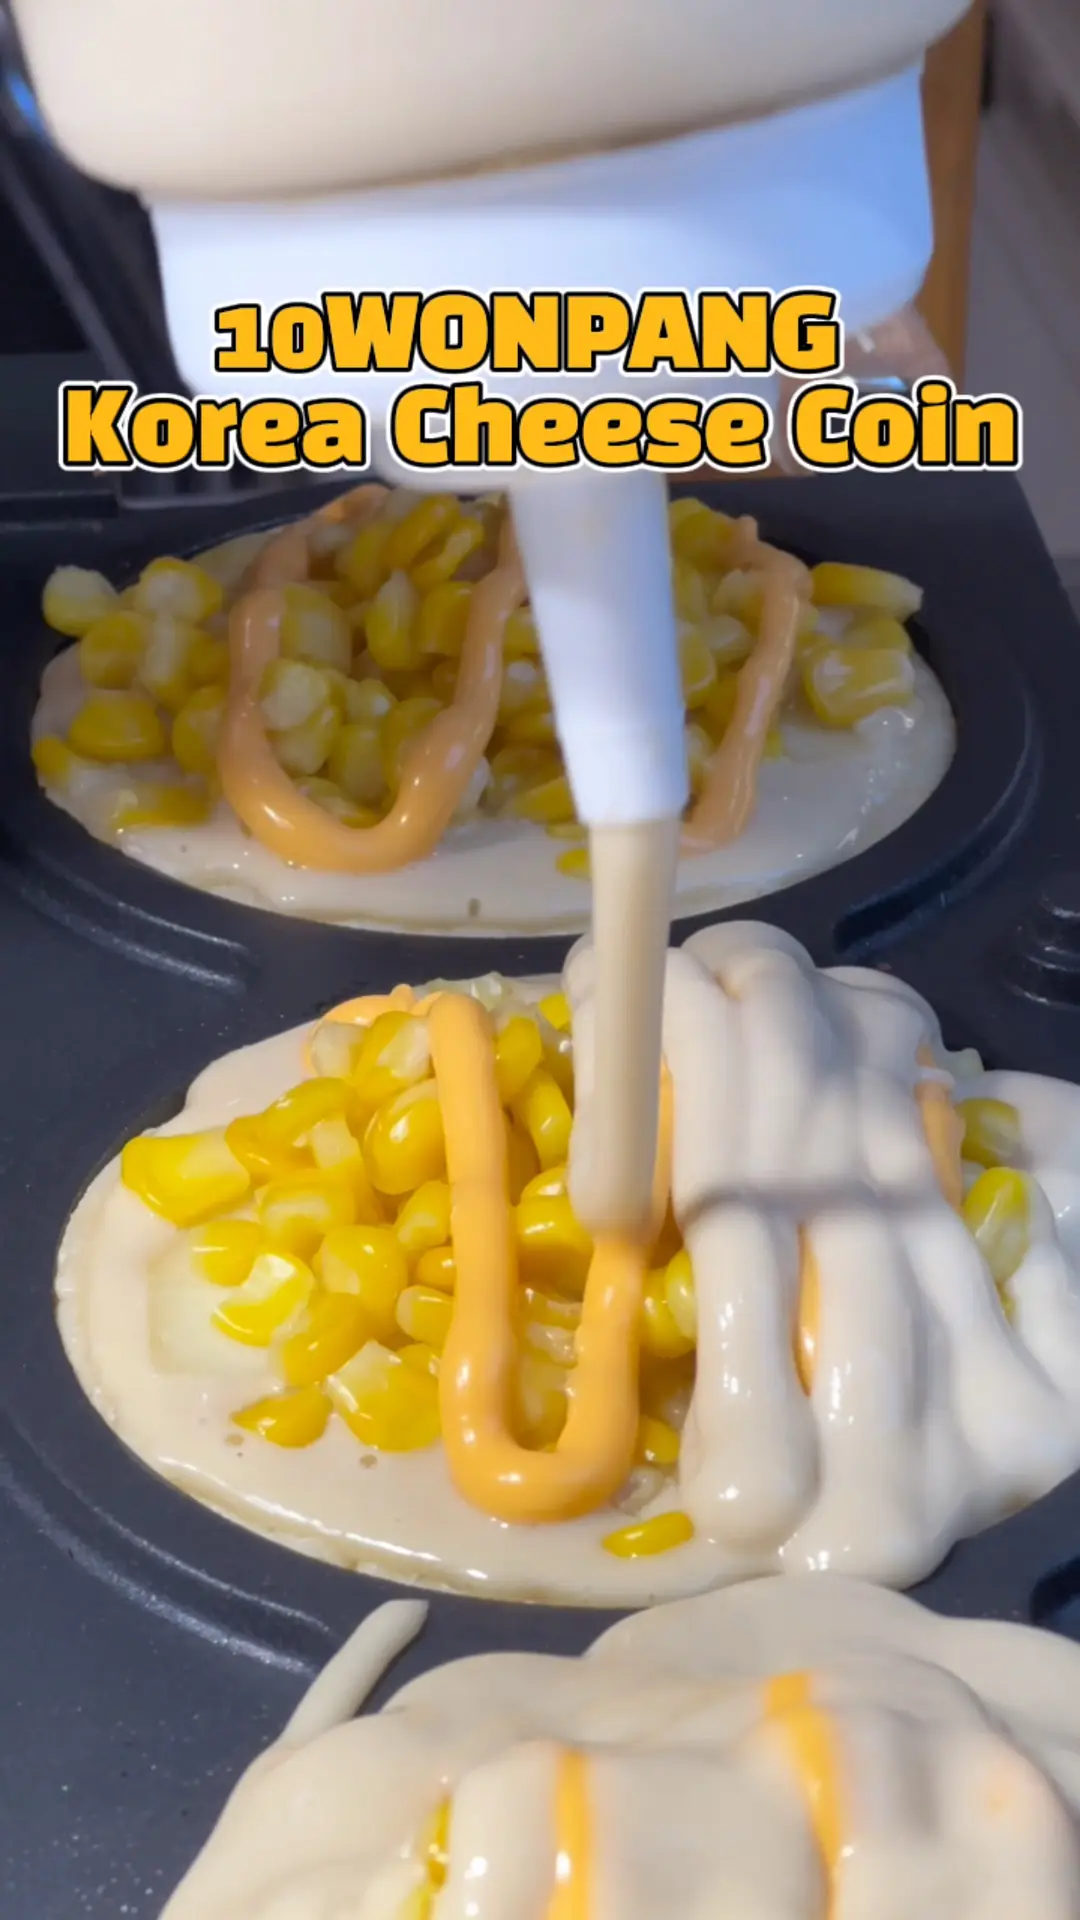 Korea Cheese Coin at Siam Square One (Siam / Korean) - BESTER EATS